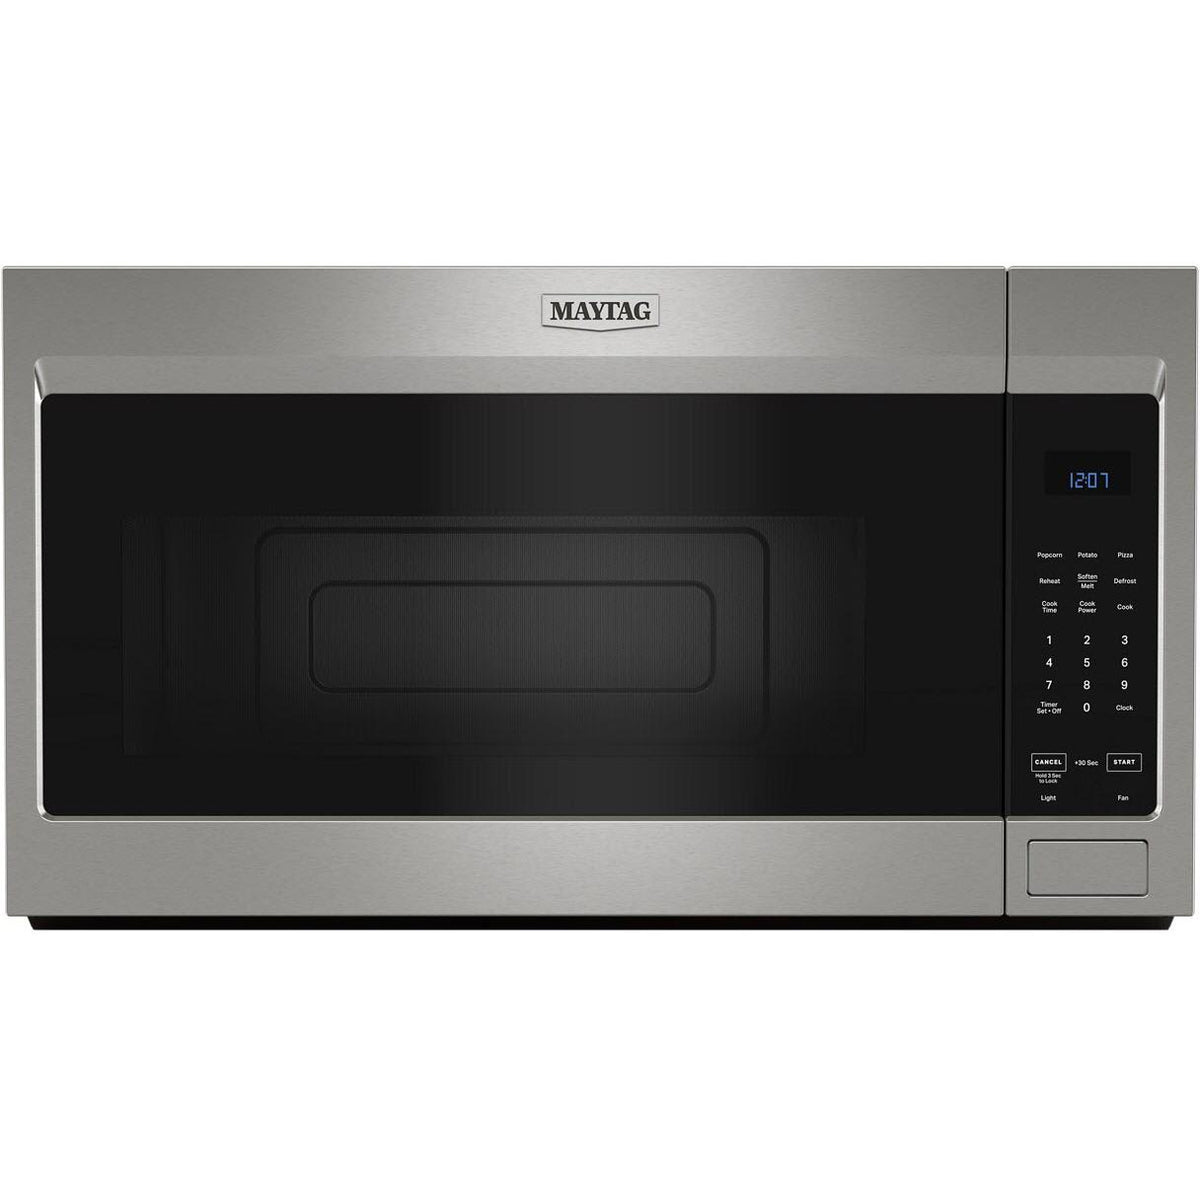 30-inch, 1.7 cu. ft. Over-the-Range Microwave Oven YMMMS4230PZ IMAGE 1